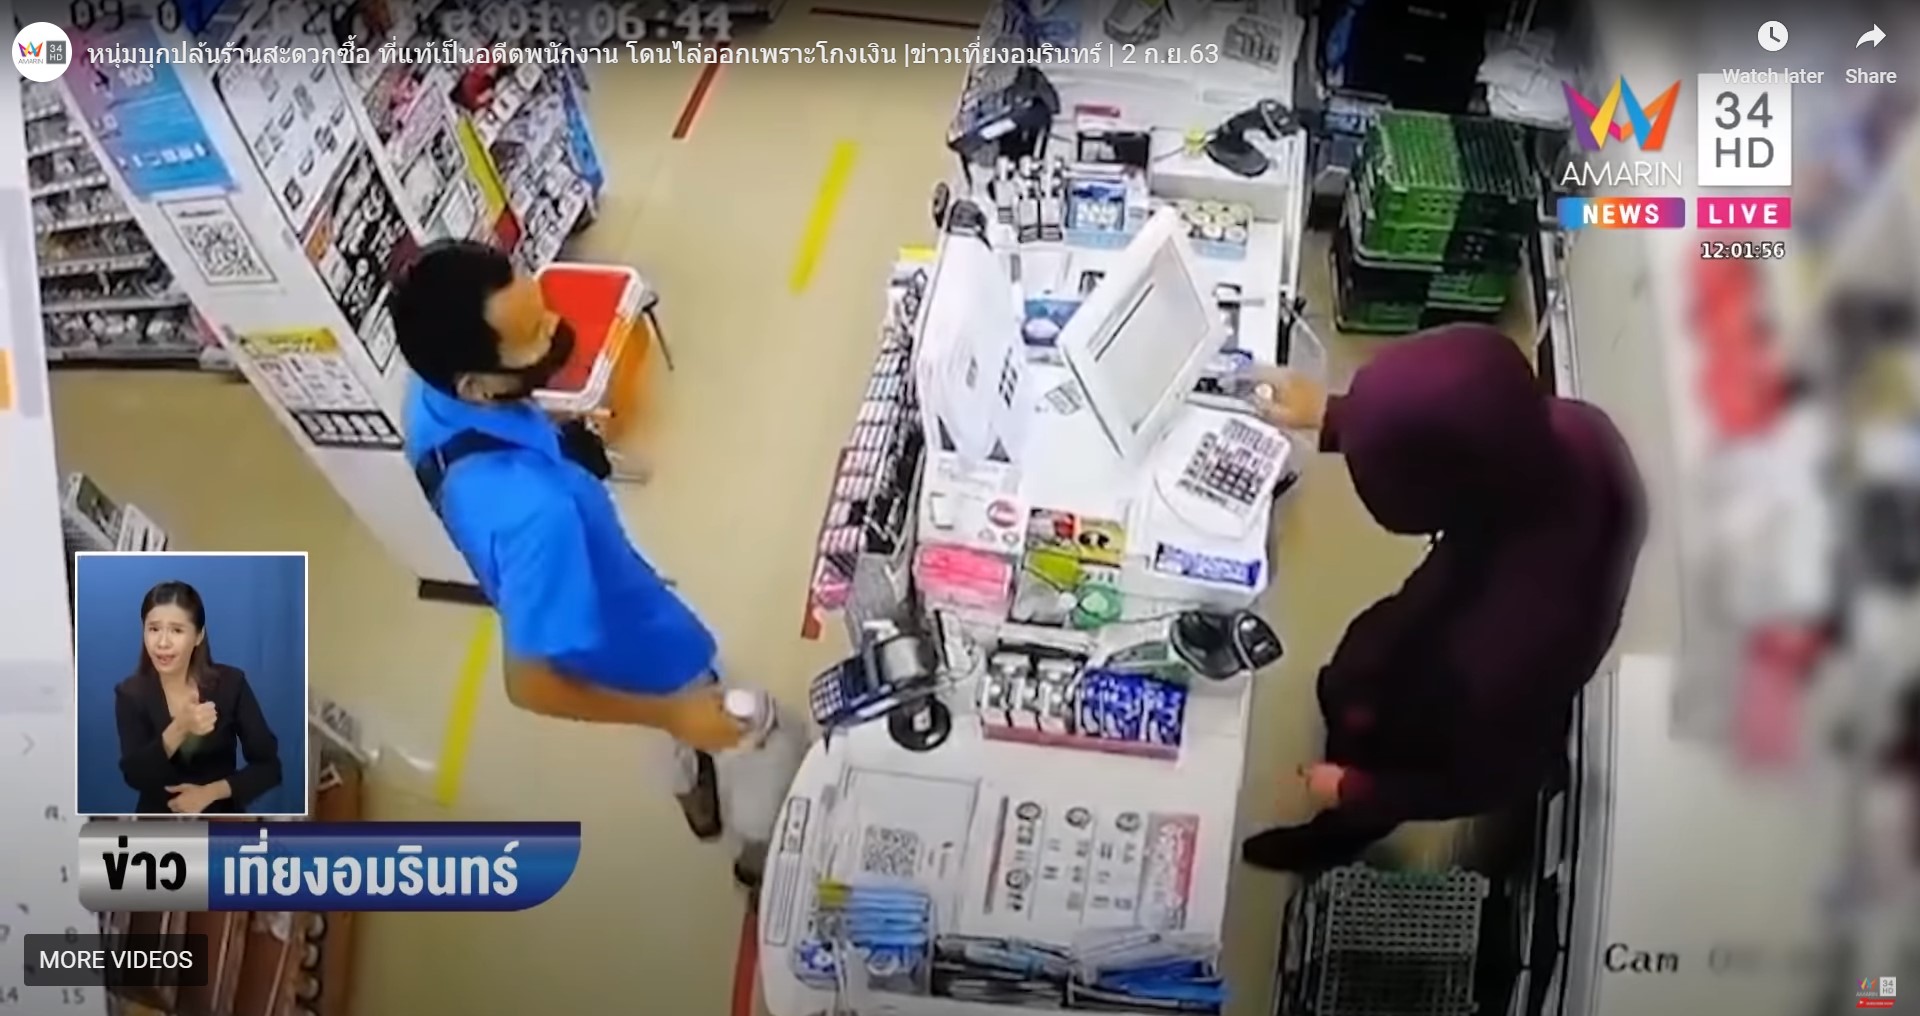 Thief ends up becoming cashier